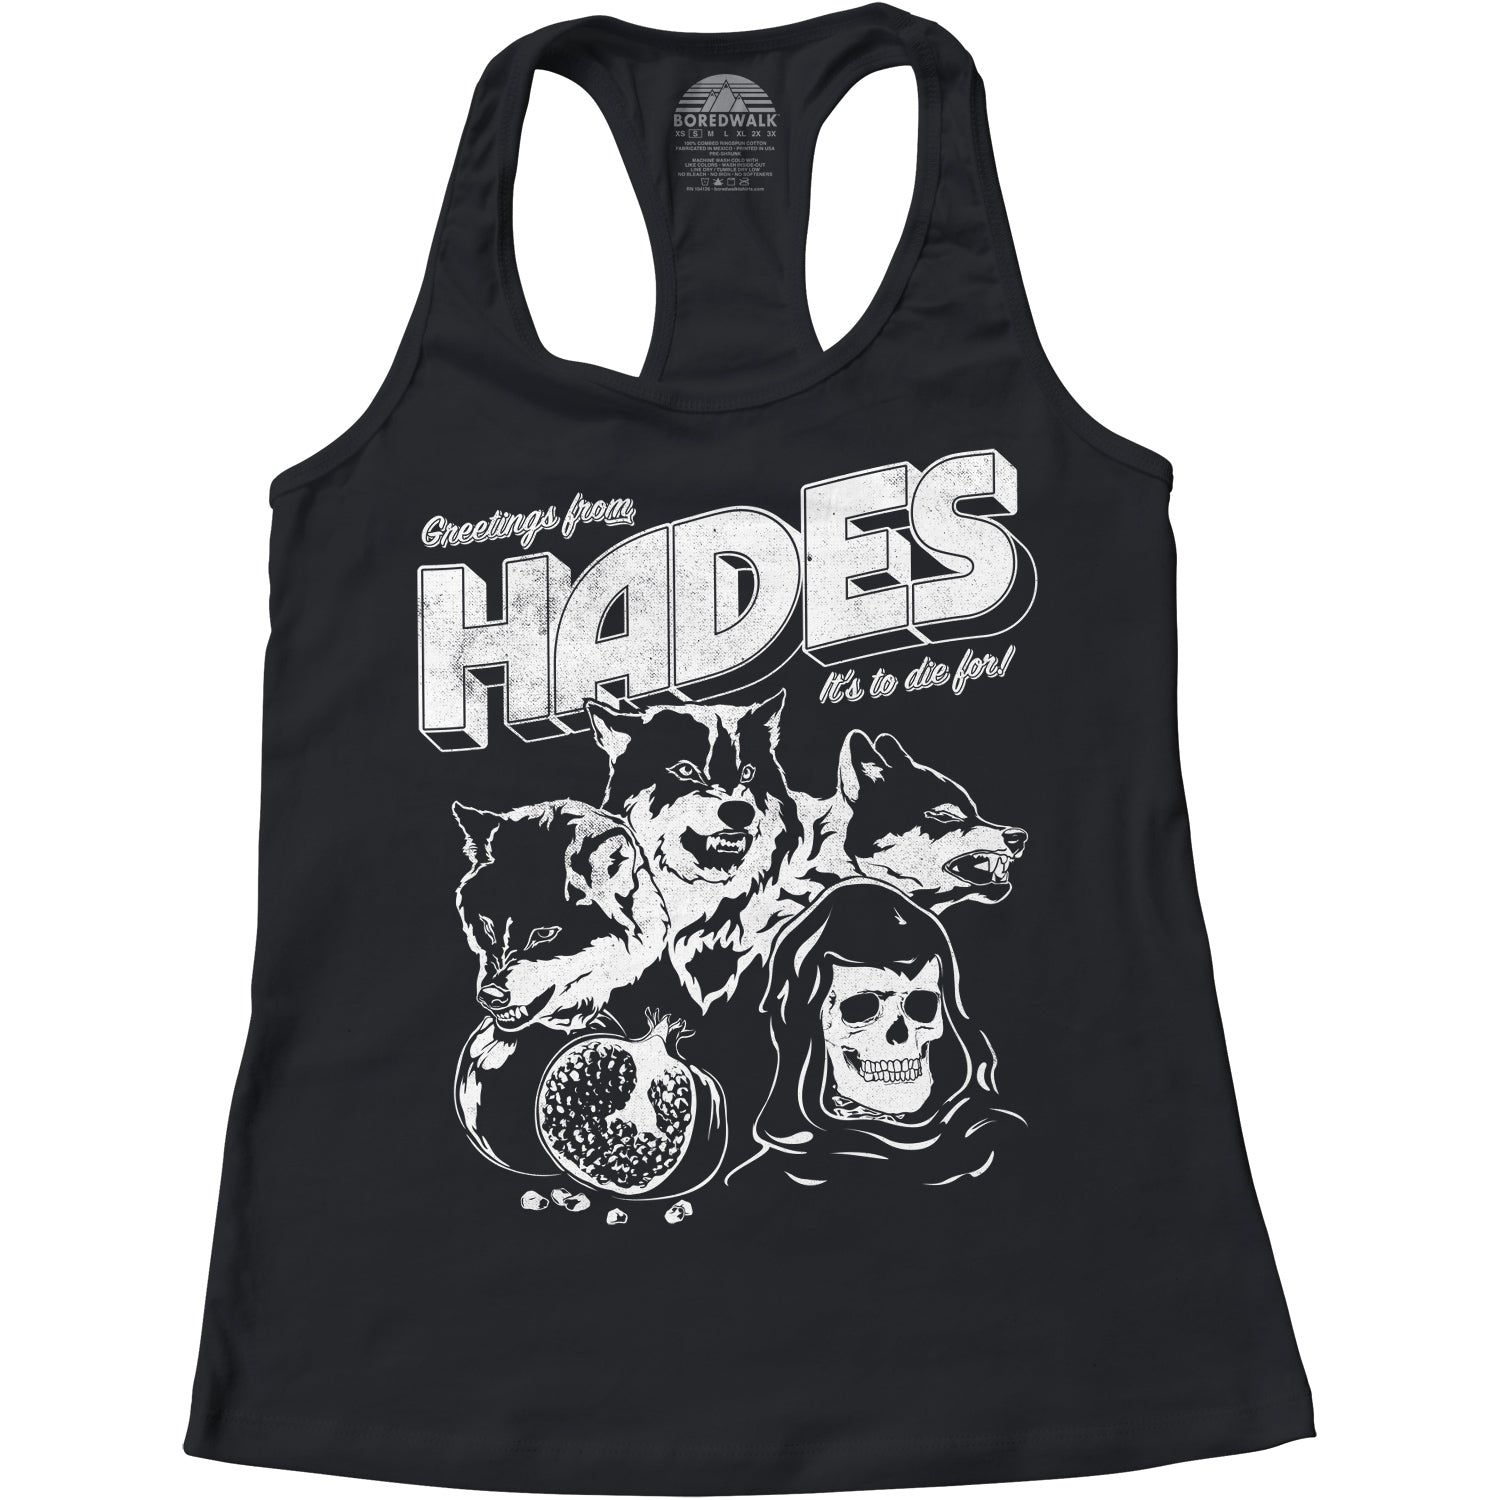 Women's Greetings from Hades Racerback Tank Top